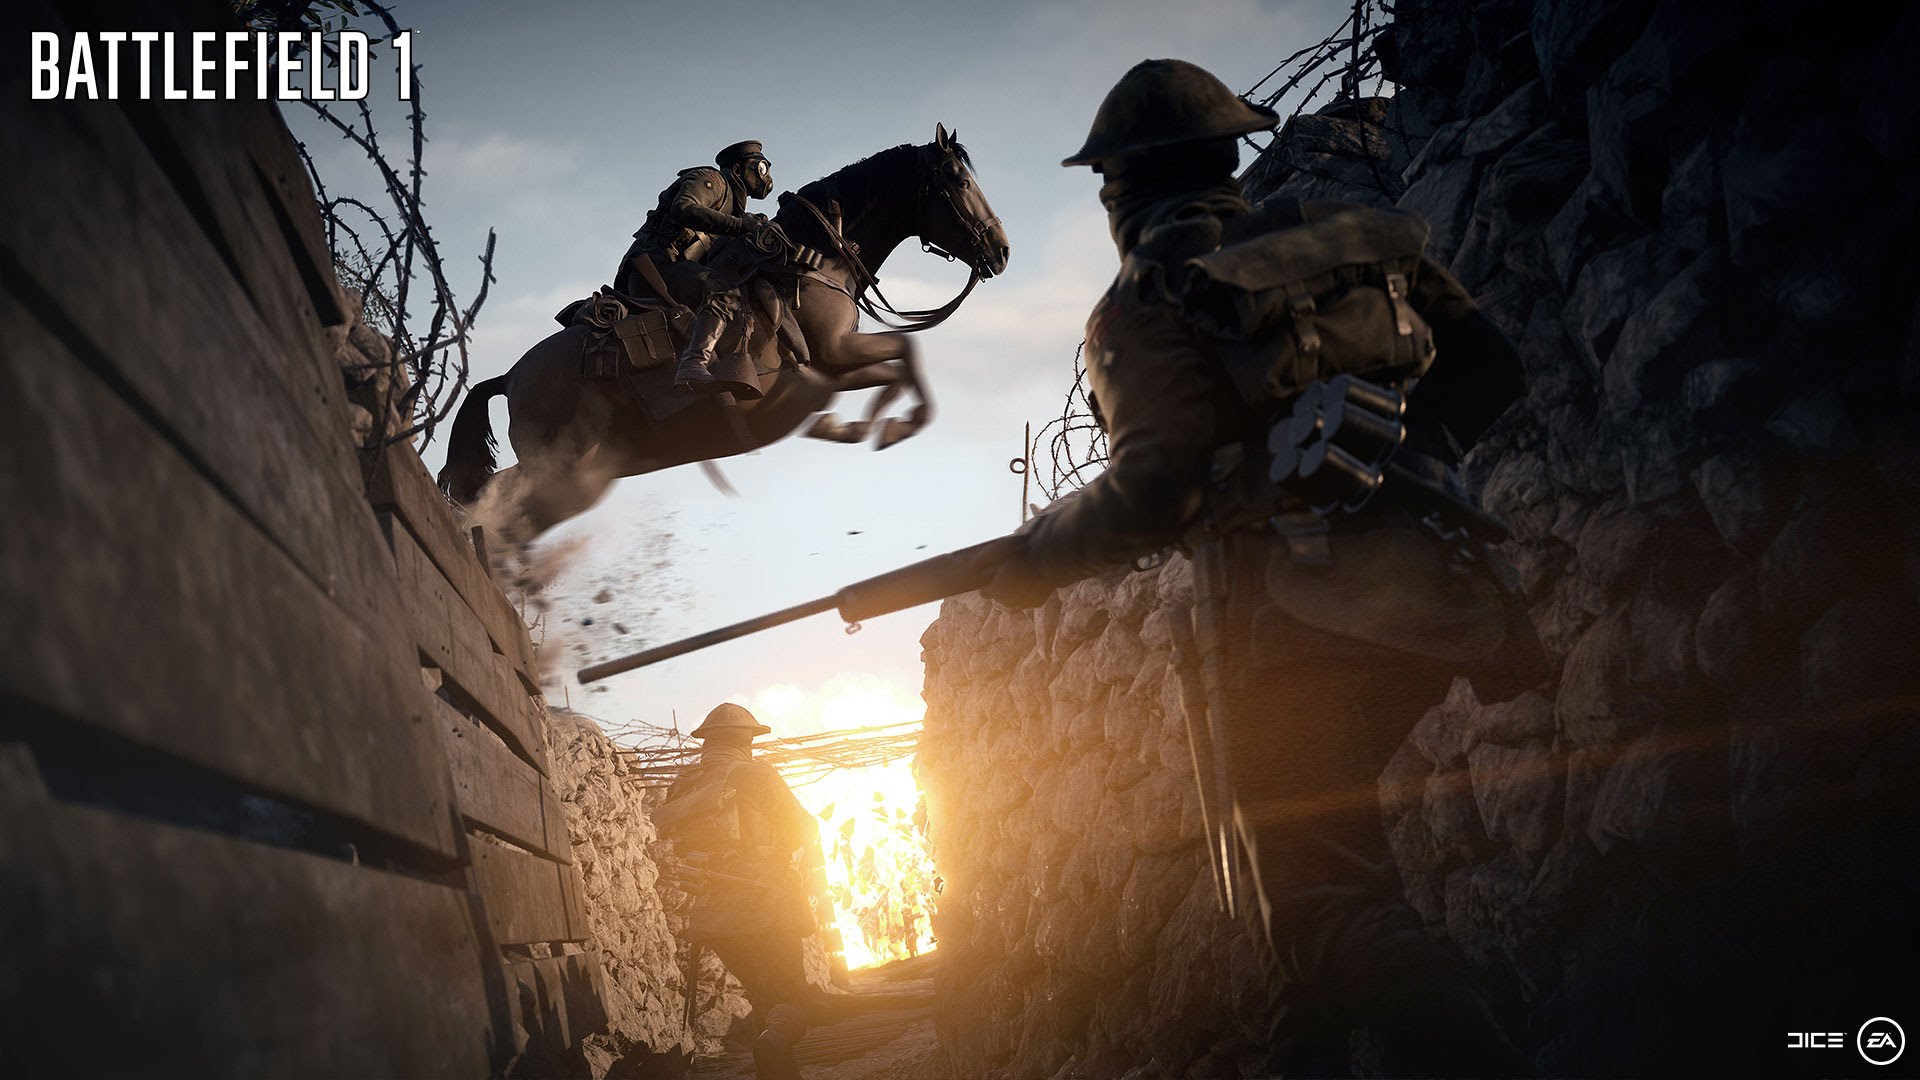 I Played The Battlefield 1 Beta And Got Run Over By A Horse